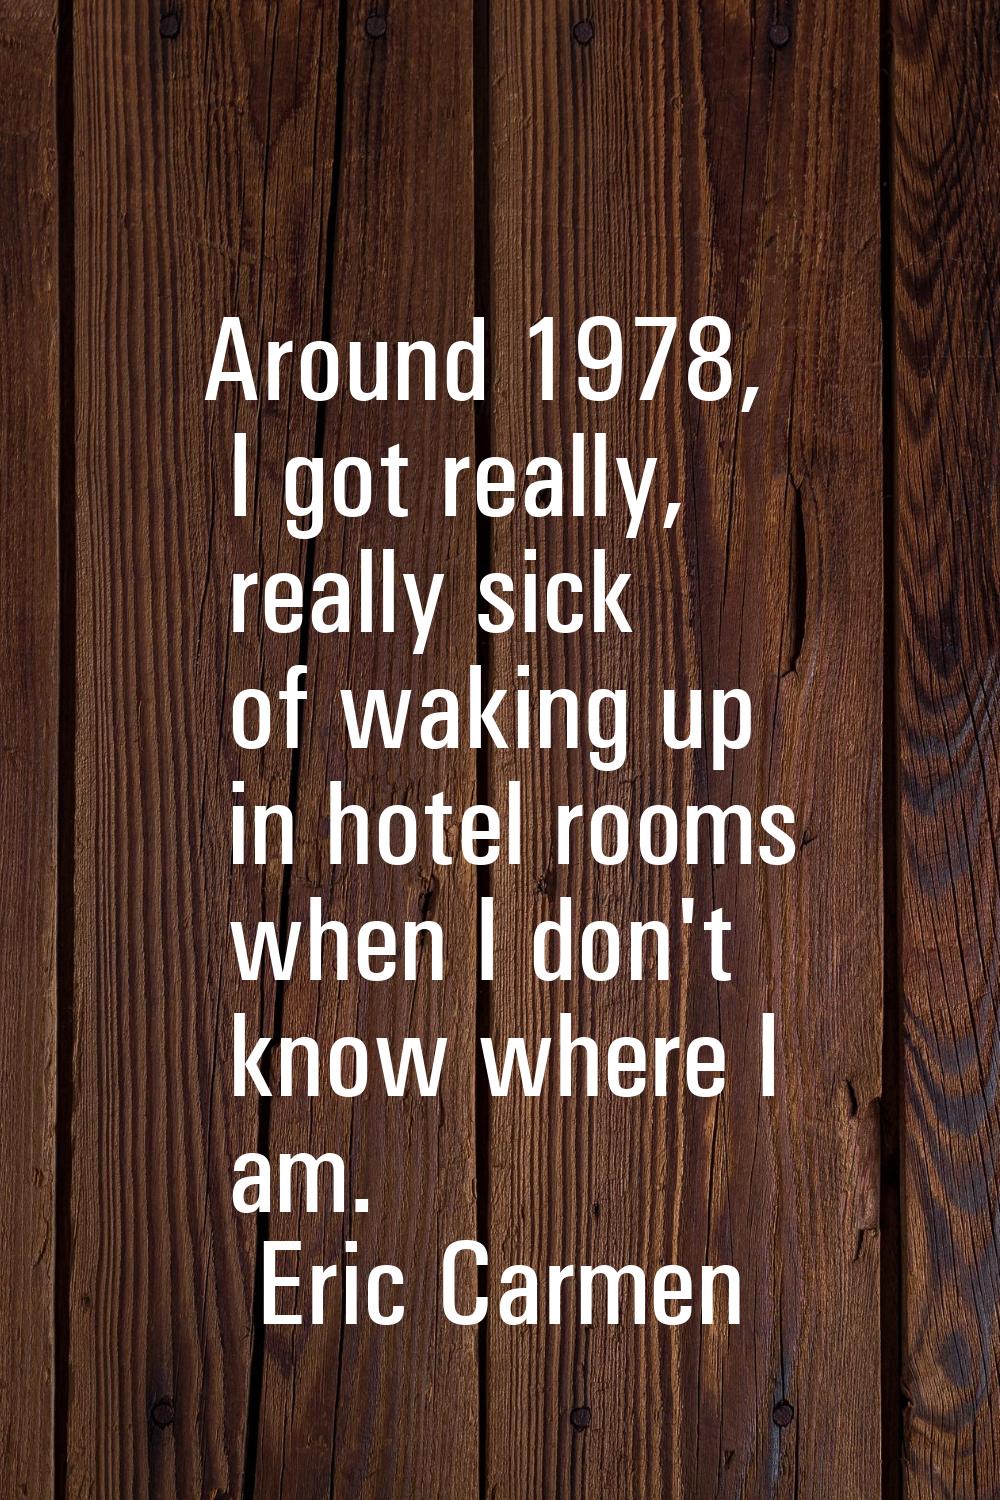 Around 1978, I got really, really sick of waking up in hotel rooms when I don't know where I am.